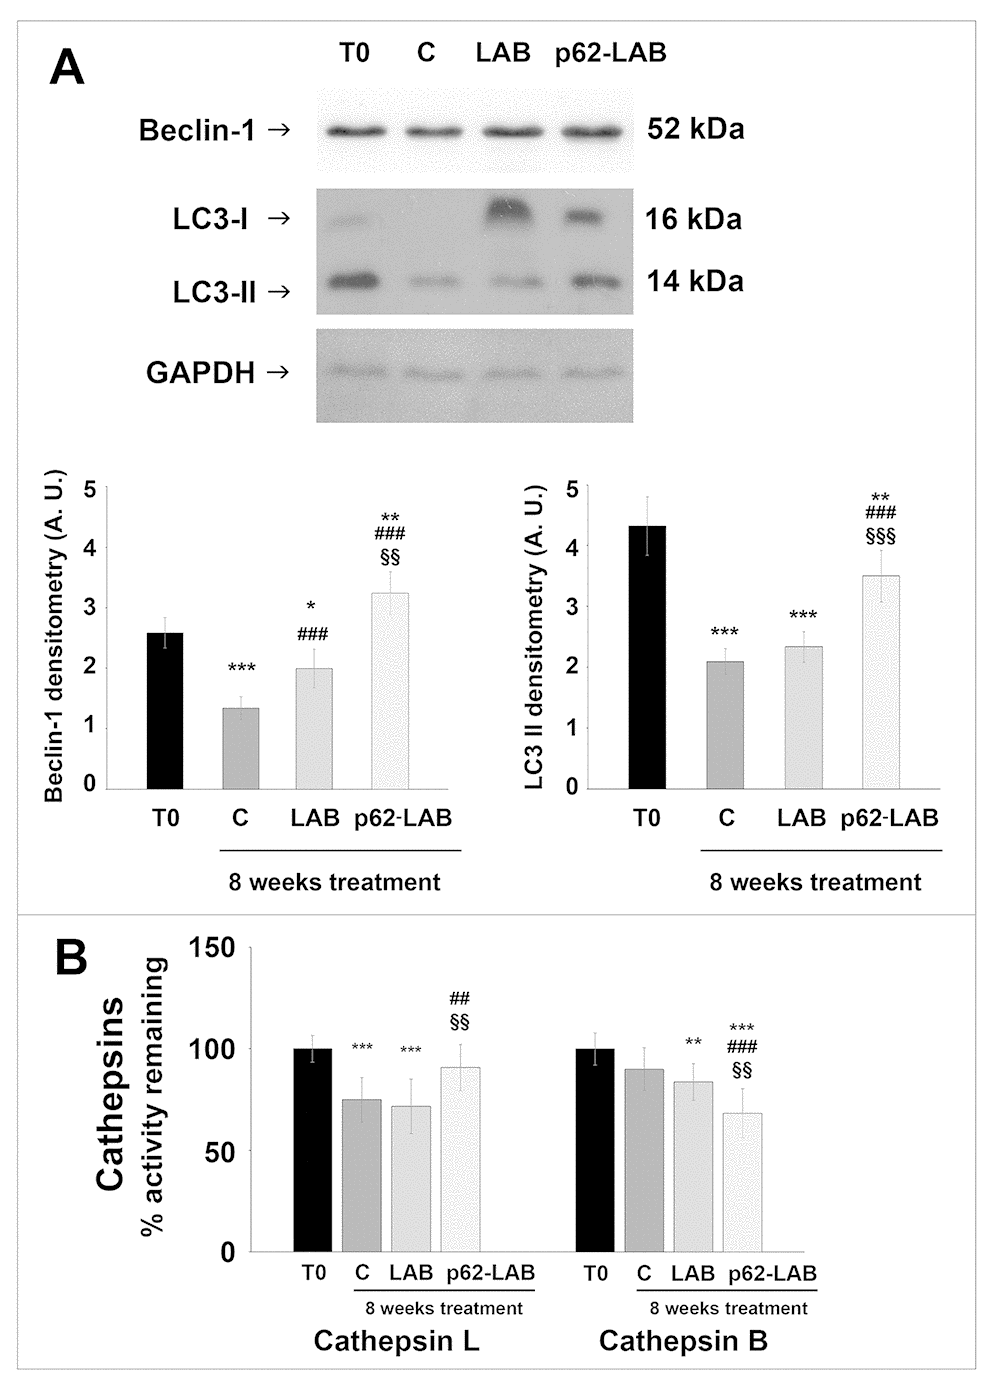 Autophagic markers in the brain of 3xTg-AD mice. Beclin-1 and LC3 II expression in brain homogenates of 3xTg-AD mice (panel A). GAPDH was used as a control to check equal protein loading (*p**p***p###p§§p§§§pB) (**p***p##p###p§§p